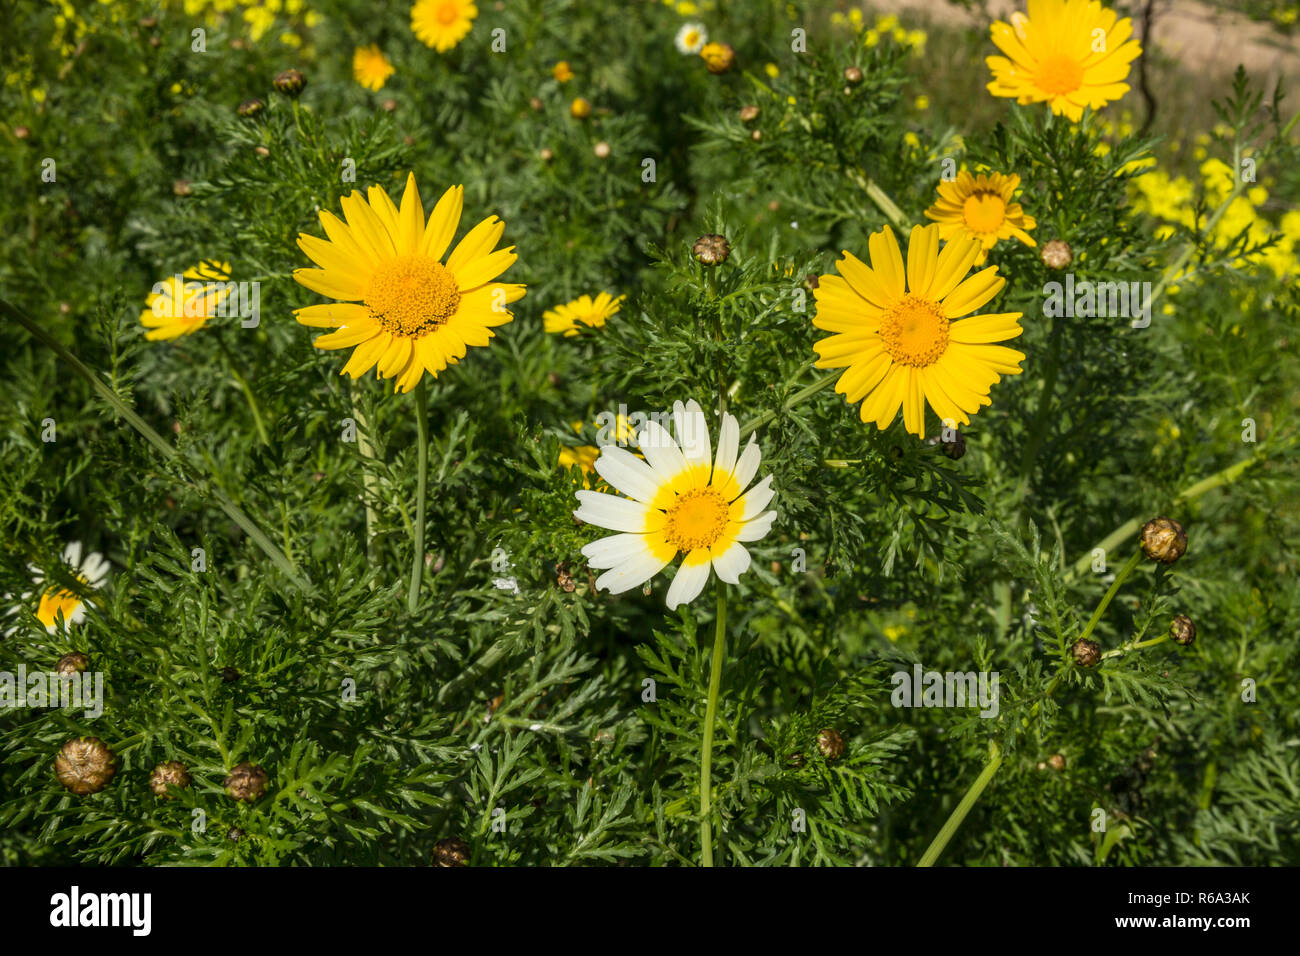 Crown Spider Flower, Cup-Shaped Inflorescences Of Glebionis Coronaria Stock Photo